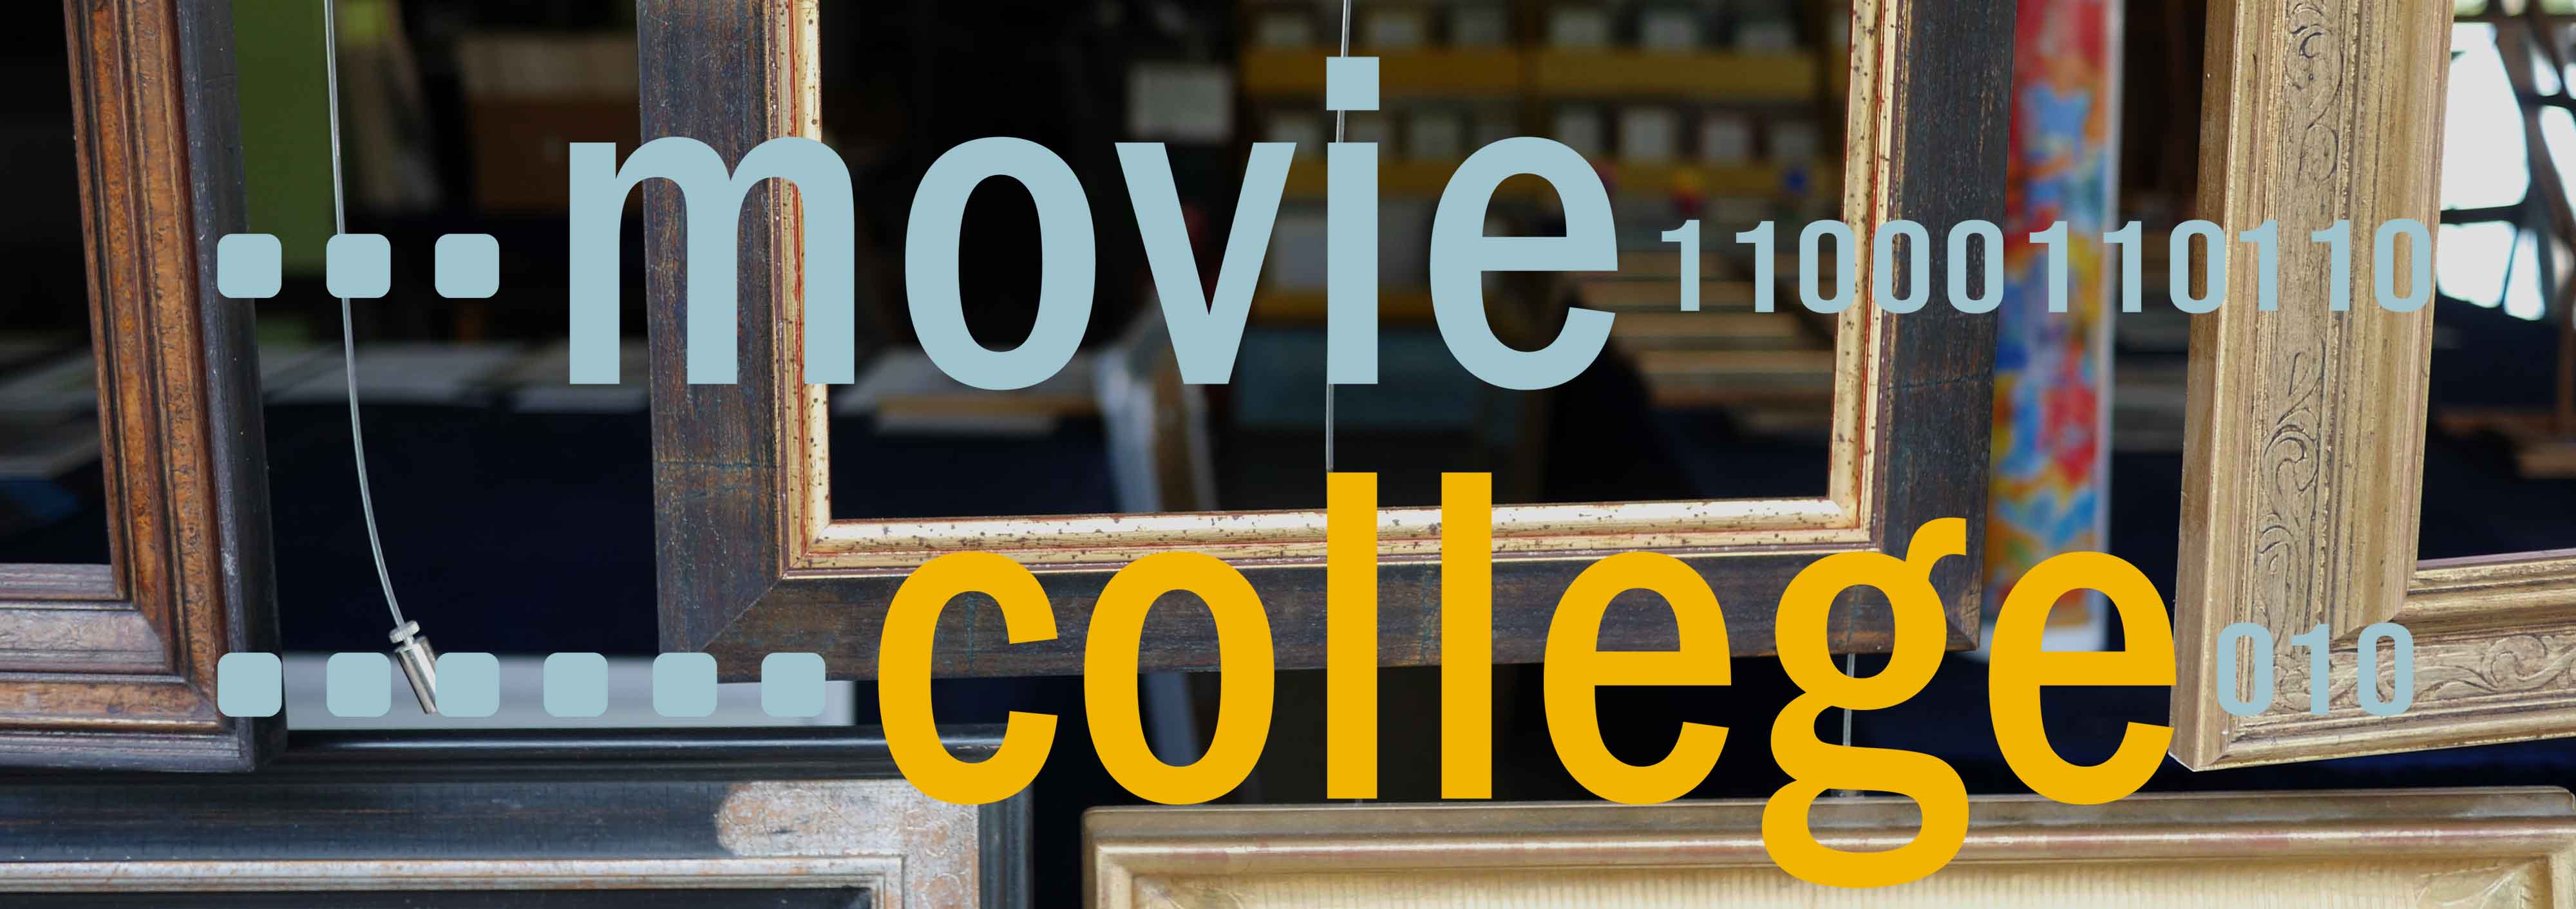 Movie College Relaunch23 small 4000